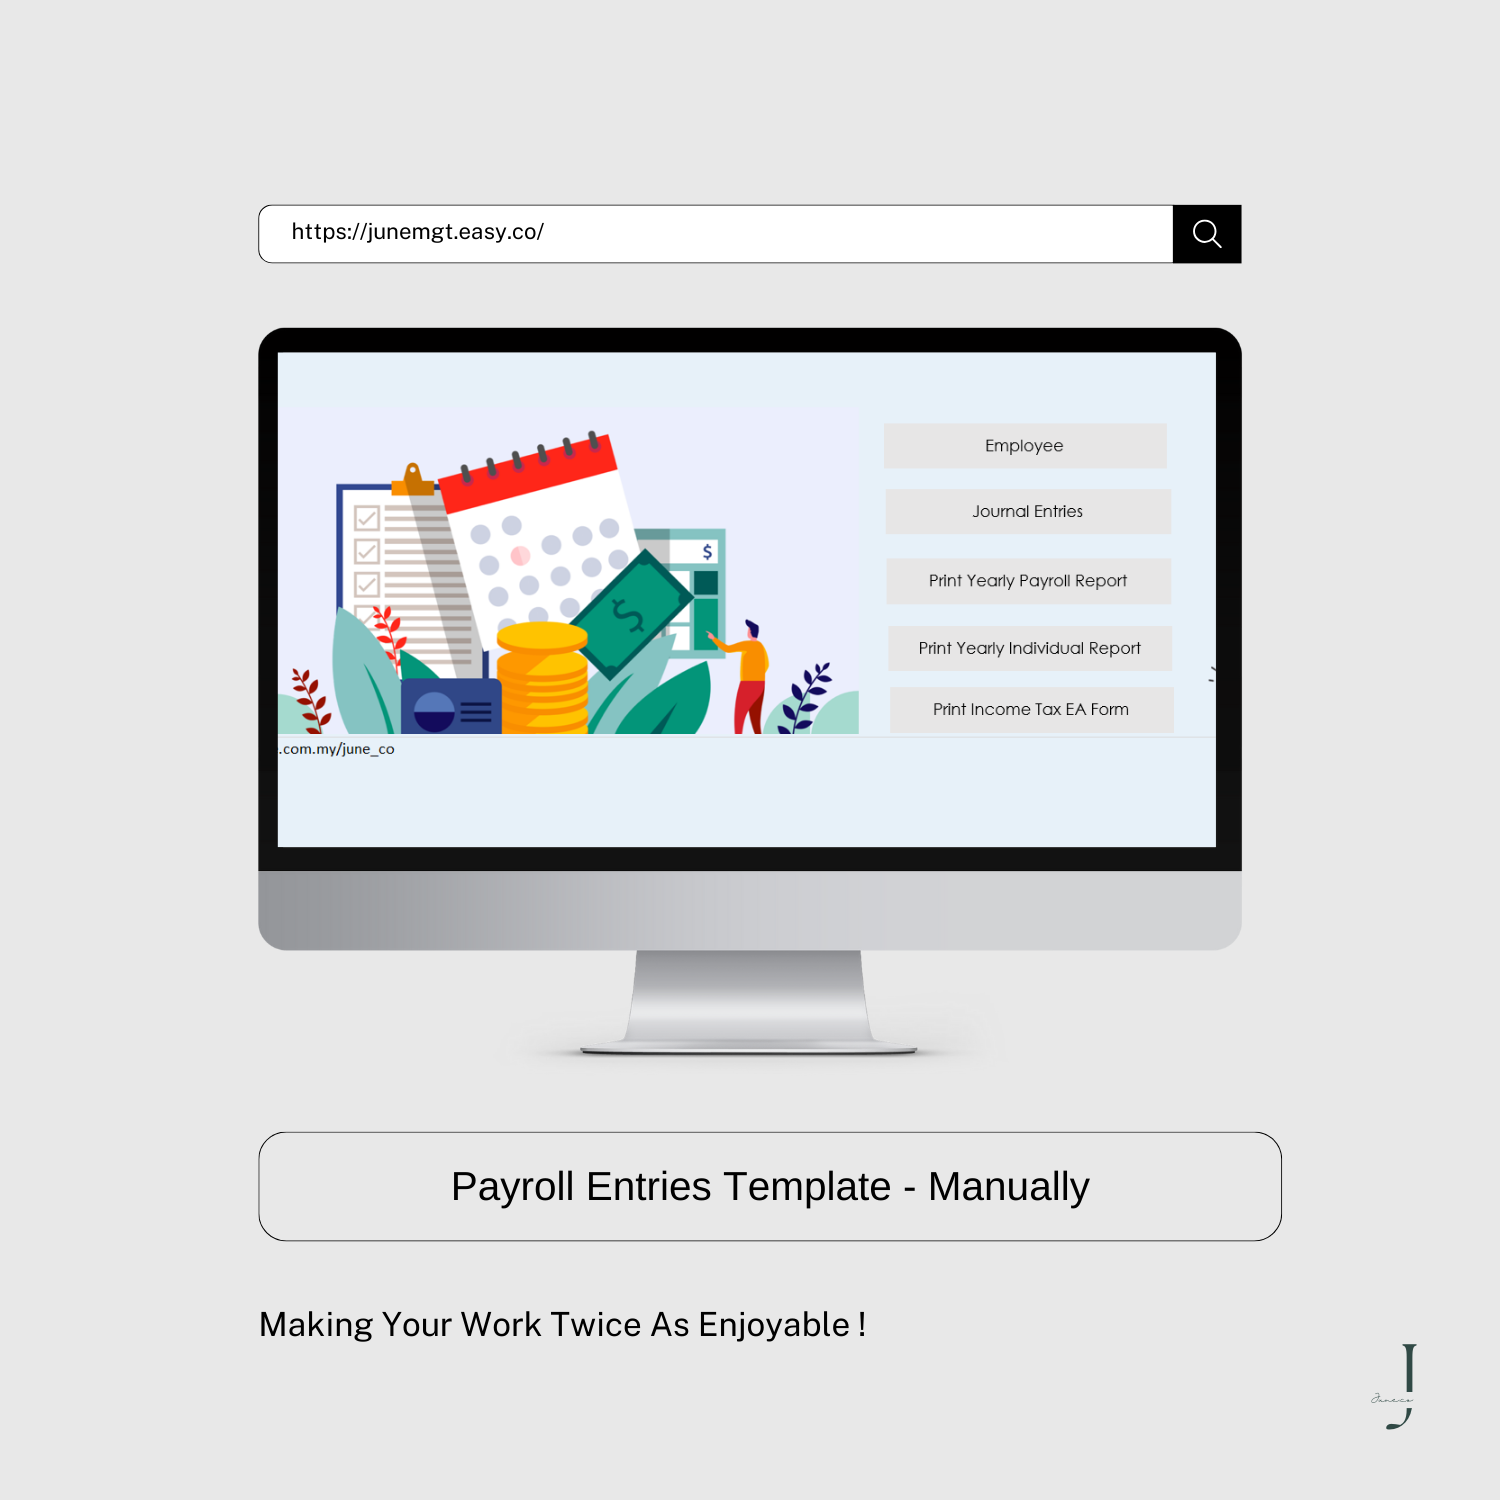 PAYROLL ENTRIES PRODUCT